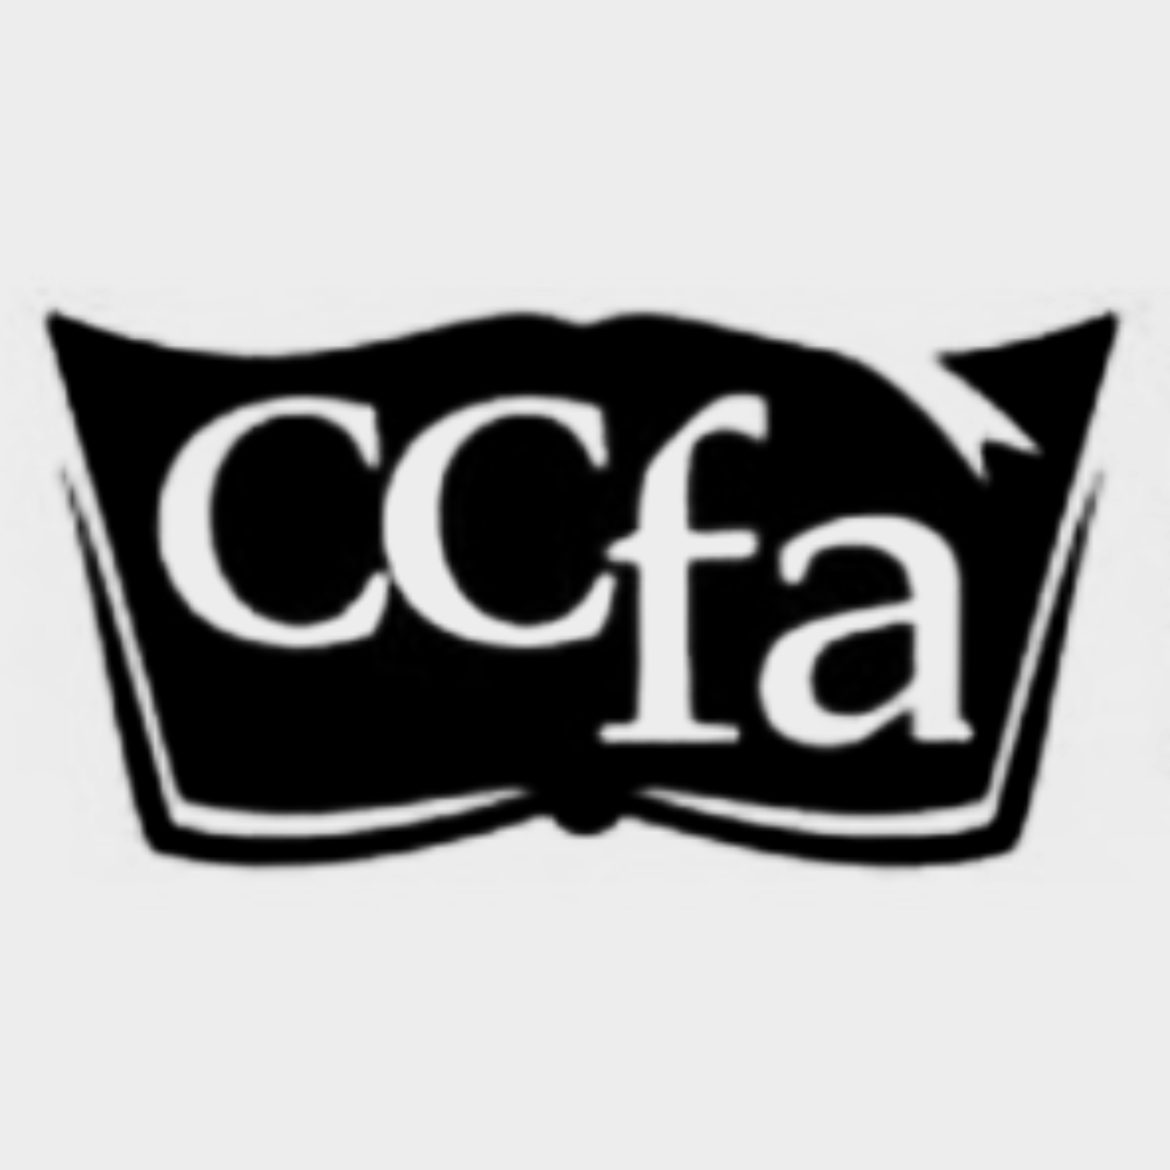 The CCFA urges for better salaries and conditions